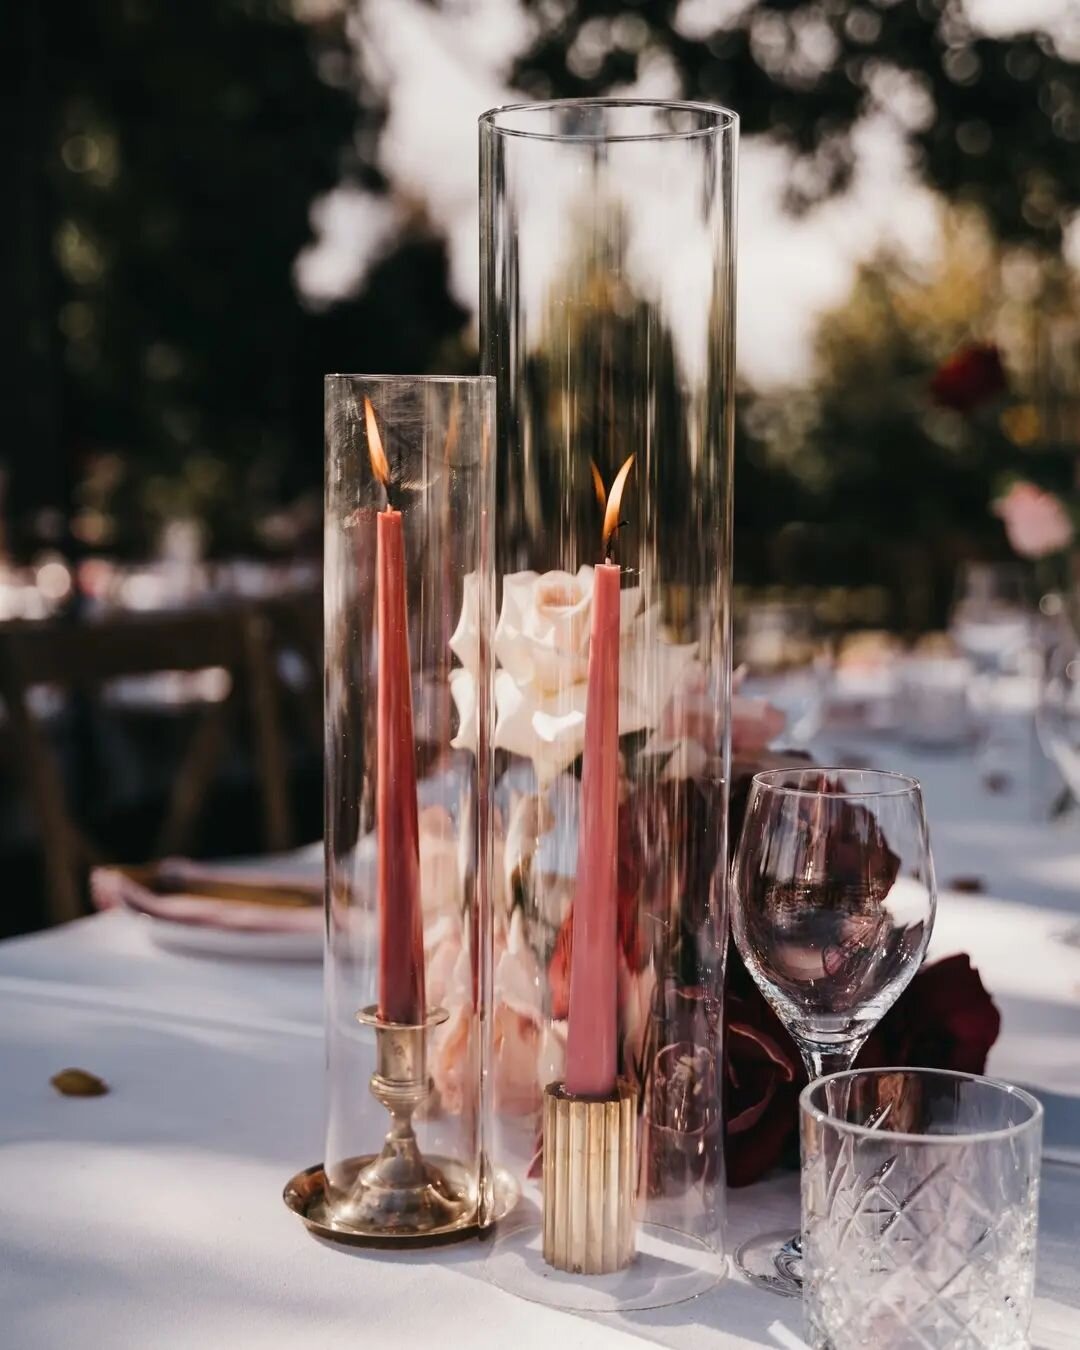 Outdoor dining is divine ✨

Florals, styling, planning @freyr.studio
Candles @hueseeka
Chairs @saltershire
Photography @doxa.visual
Videography @awkwardsoulfilms
Venue @watertonhallwines
Catering @missarahglover
Bride @rhi_tuthill
Groom @beaututhill